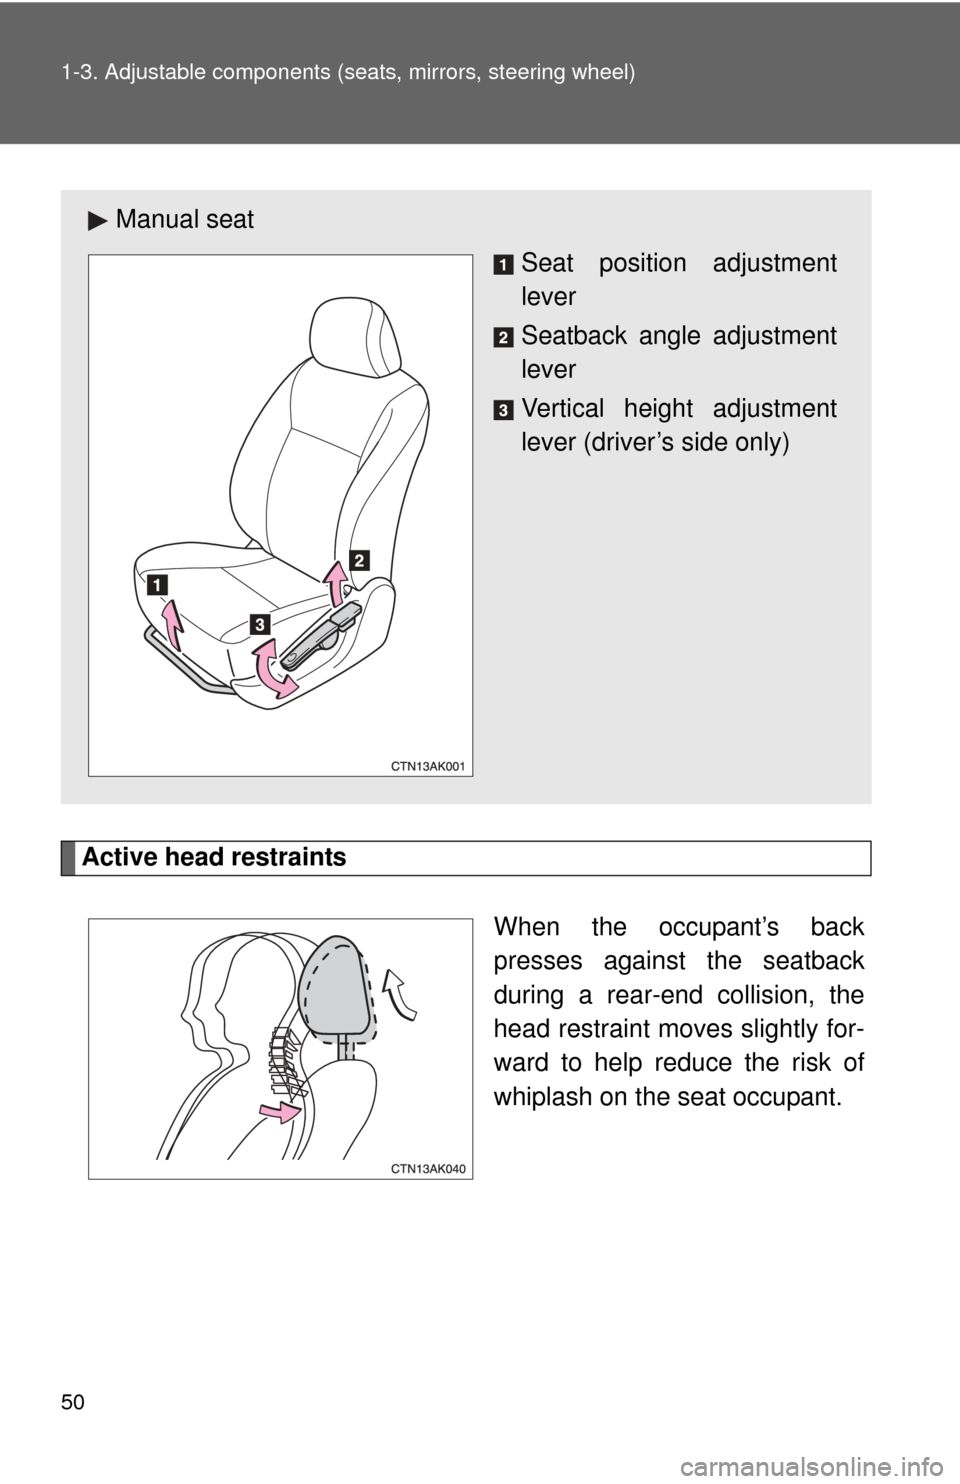 TOYOTA COROLLA 2011 10.G Owners Manual 50 1-3. Adjustable components (seats, mirrors, steering wheel)
Active head restraints
When the occupant’s back
presses against the seatback
during a rear-end collision, the
head restraint moves slig